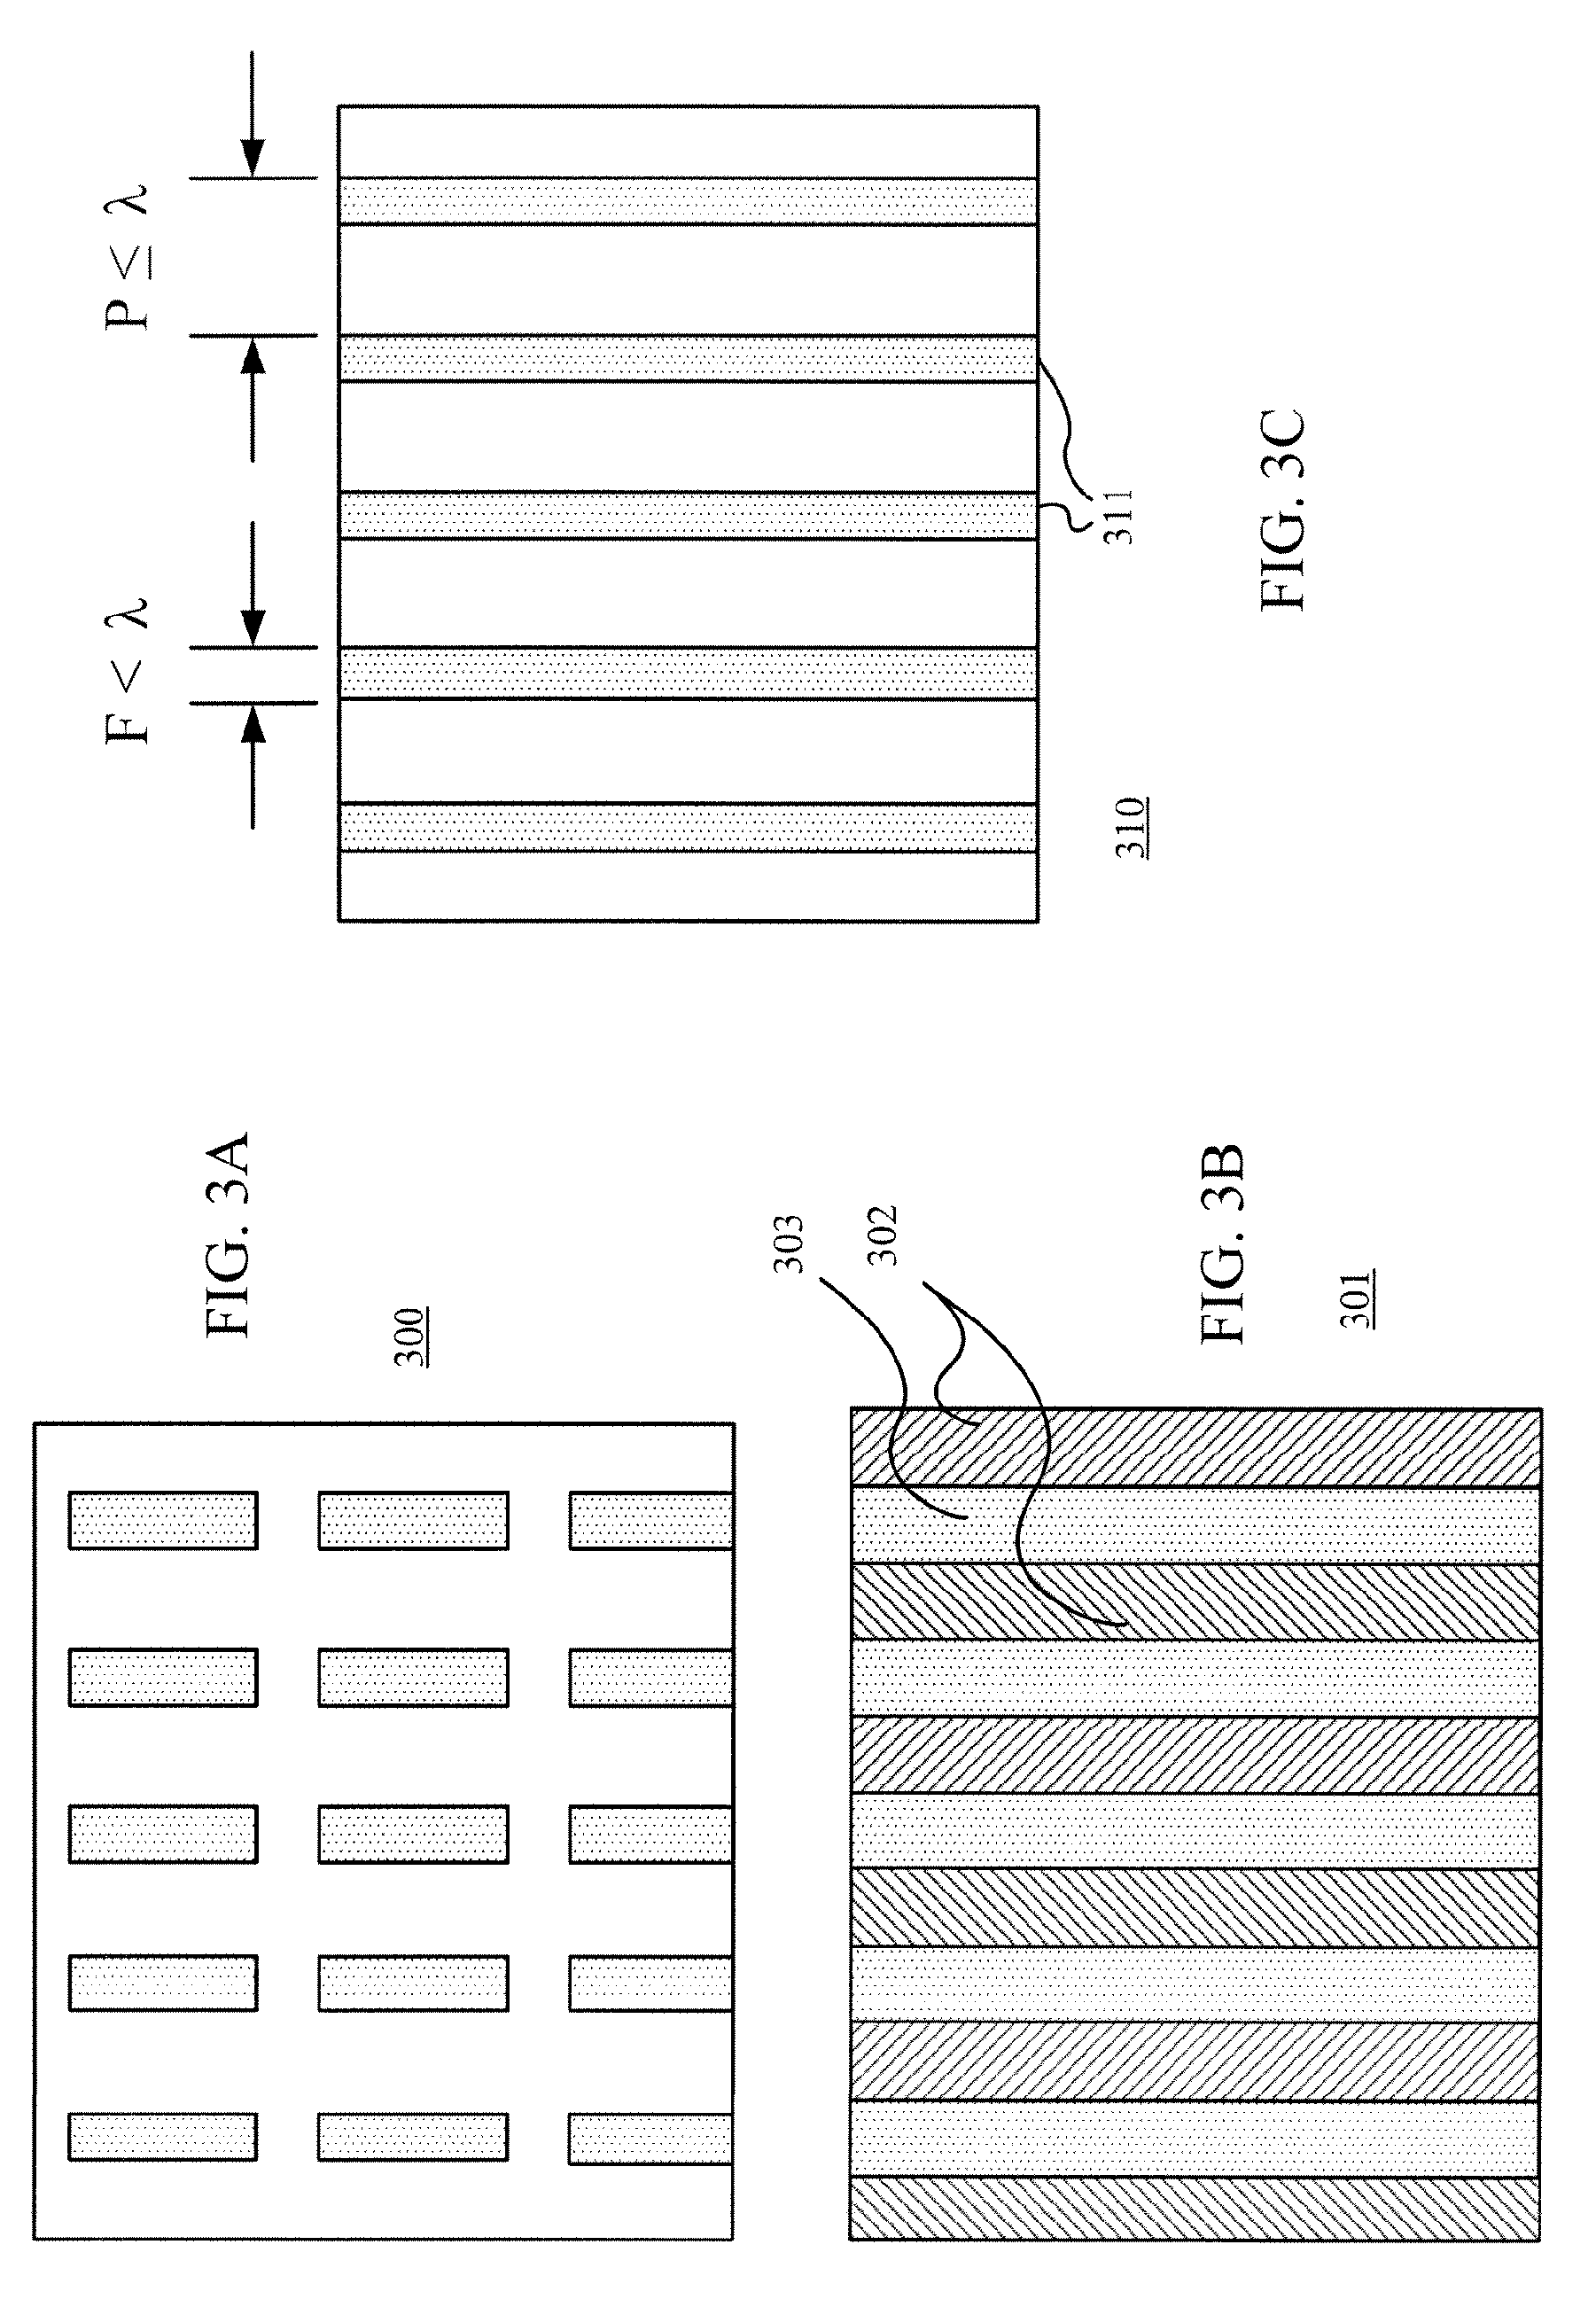 Patterning a single integrated circuit layer using multiple masks and multiple masking layers